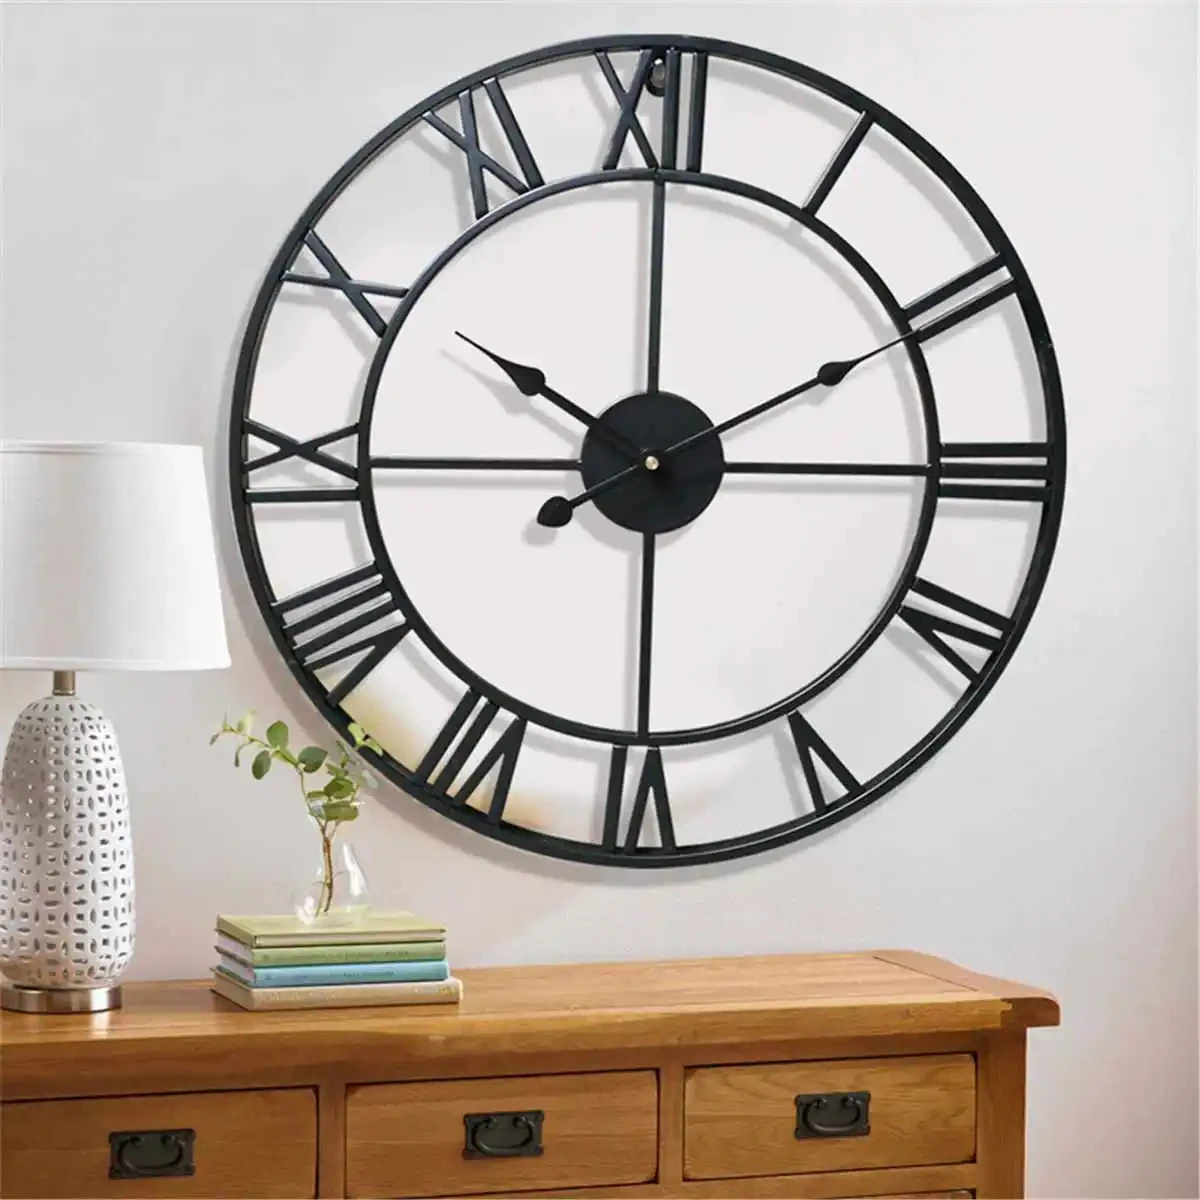 

3D Wall Clocks Roman Numerals Retro Round Metal Iron Accurate Silent Nordic Hanging Ornament Living Room Decoration